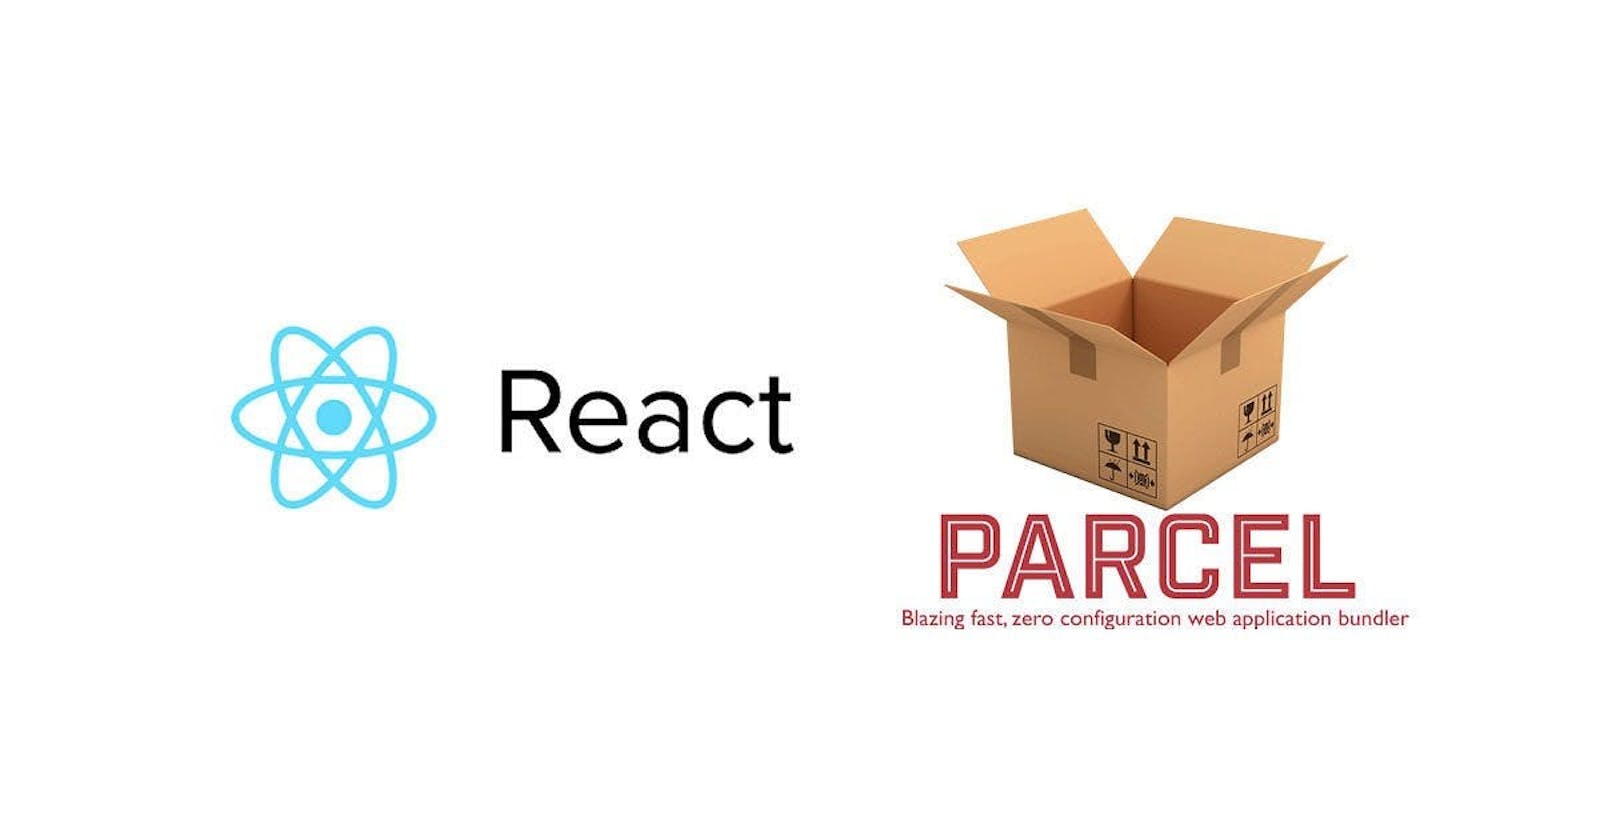 Igniting ⚡️ our React App with Parcel